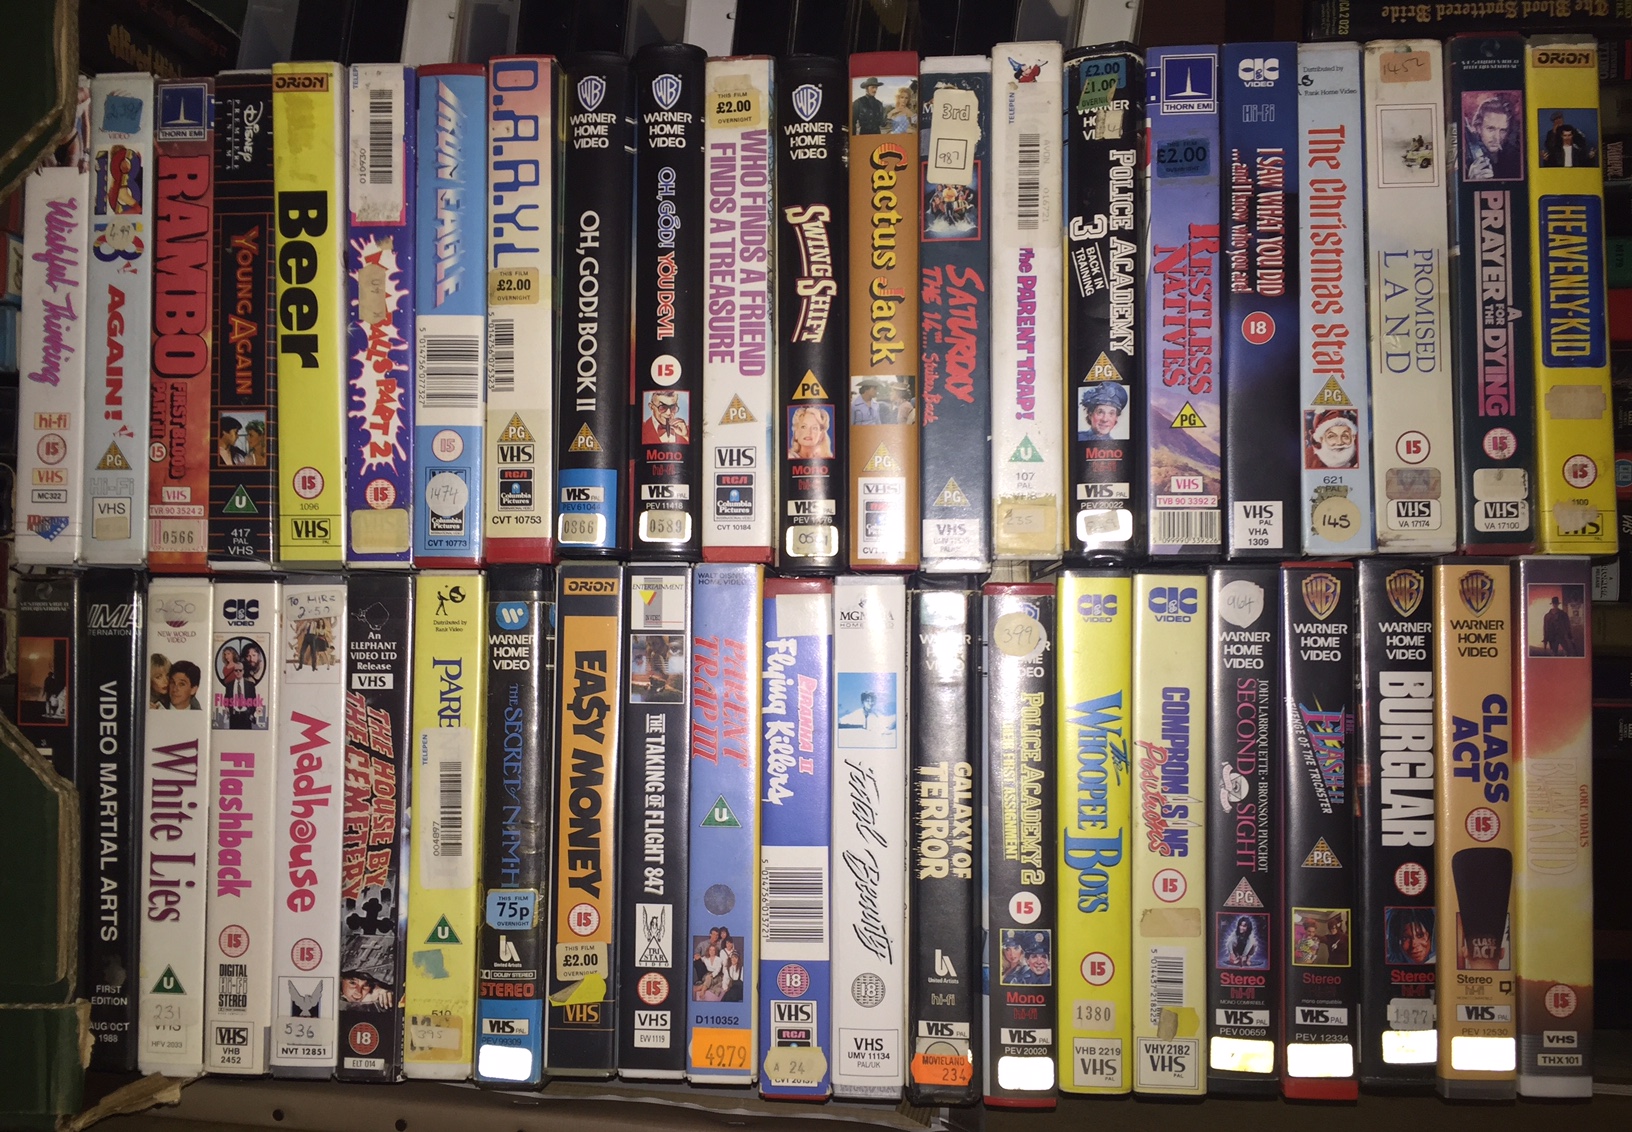 The First VHS Haul of 2016.